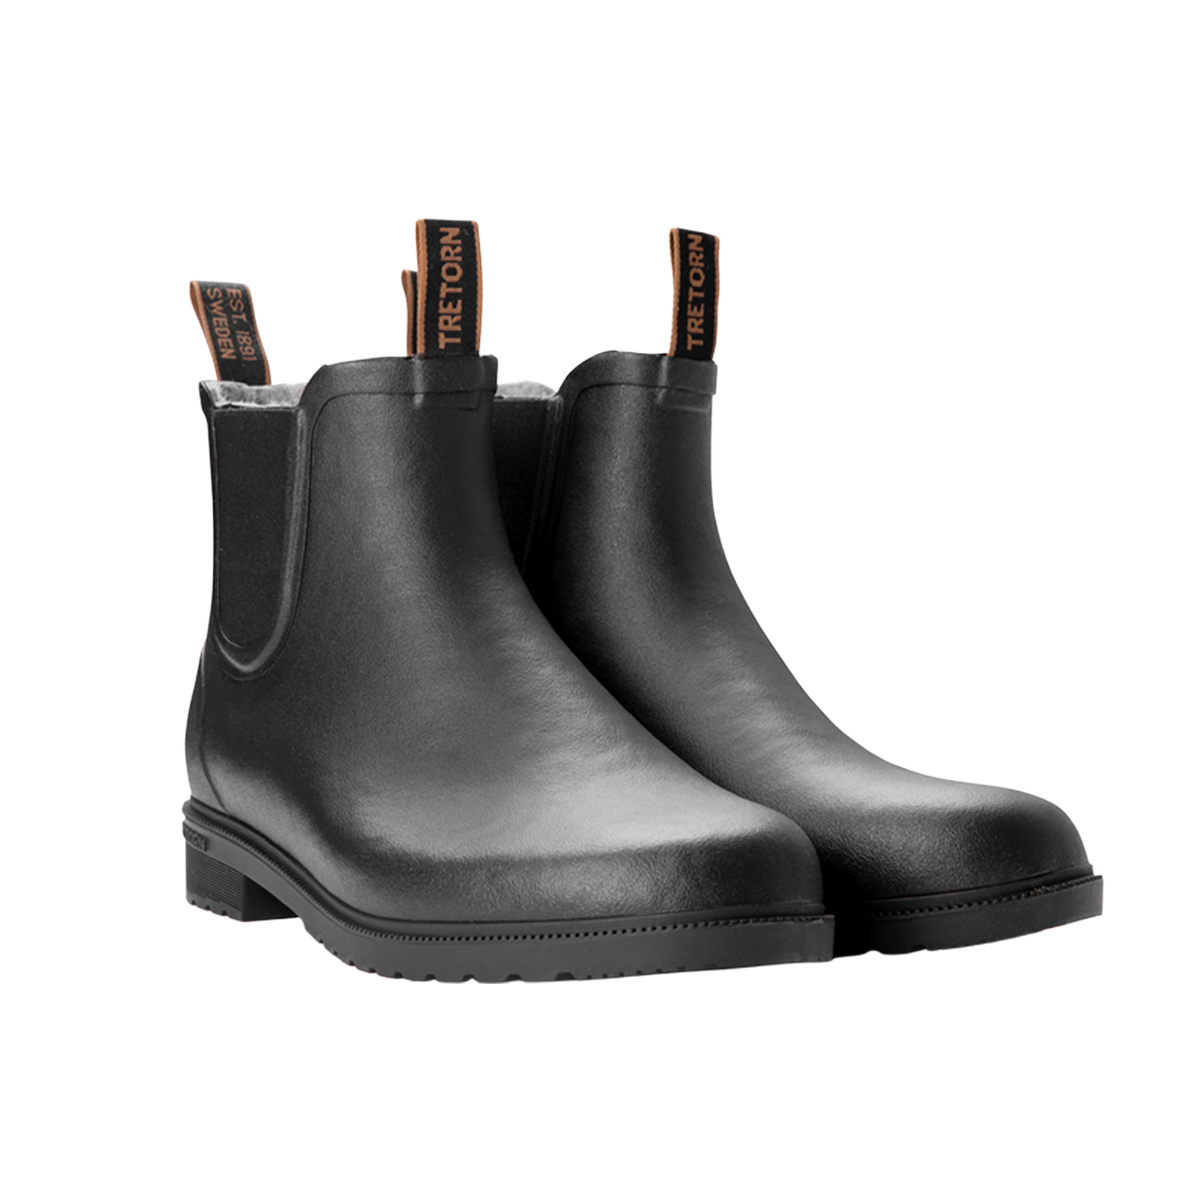 Tretorn Black Rubber Wool Lined Chelsea Boots Feature 1